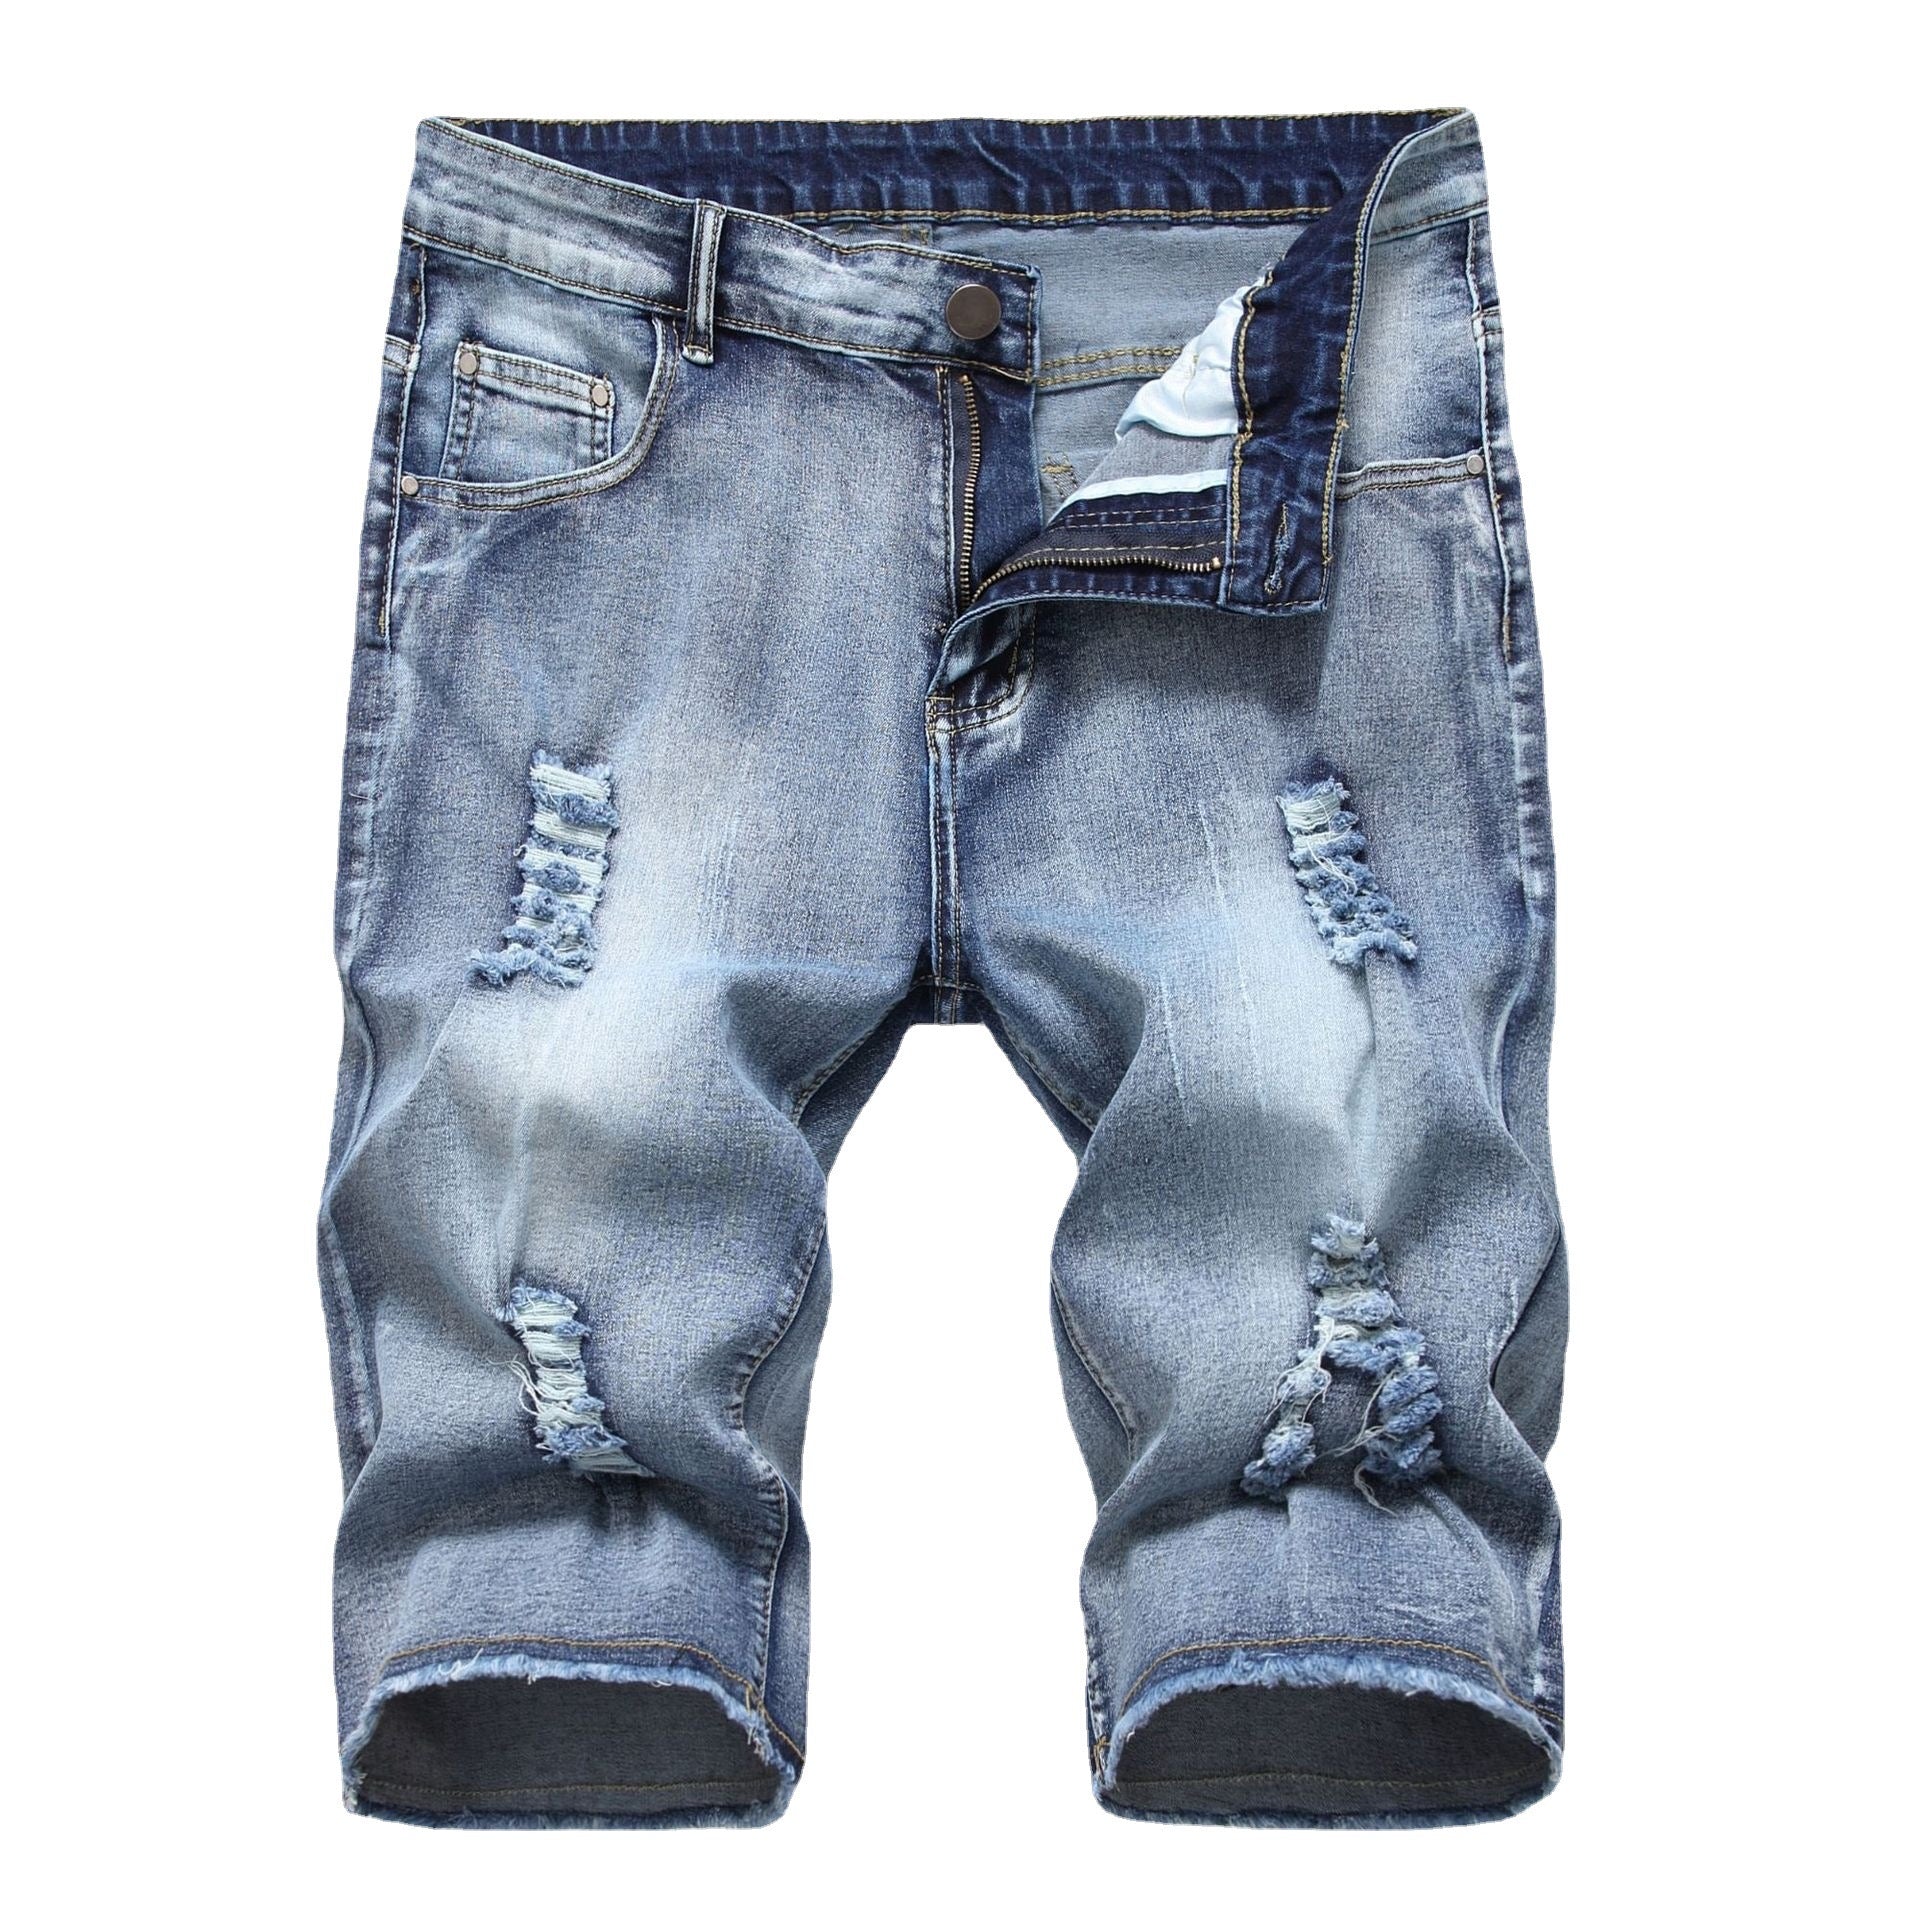 NBBBN - Jeans Shorts for Men - Sarman Fashion - Wholesale Clothing Fashion Brand for Men from Canada